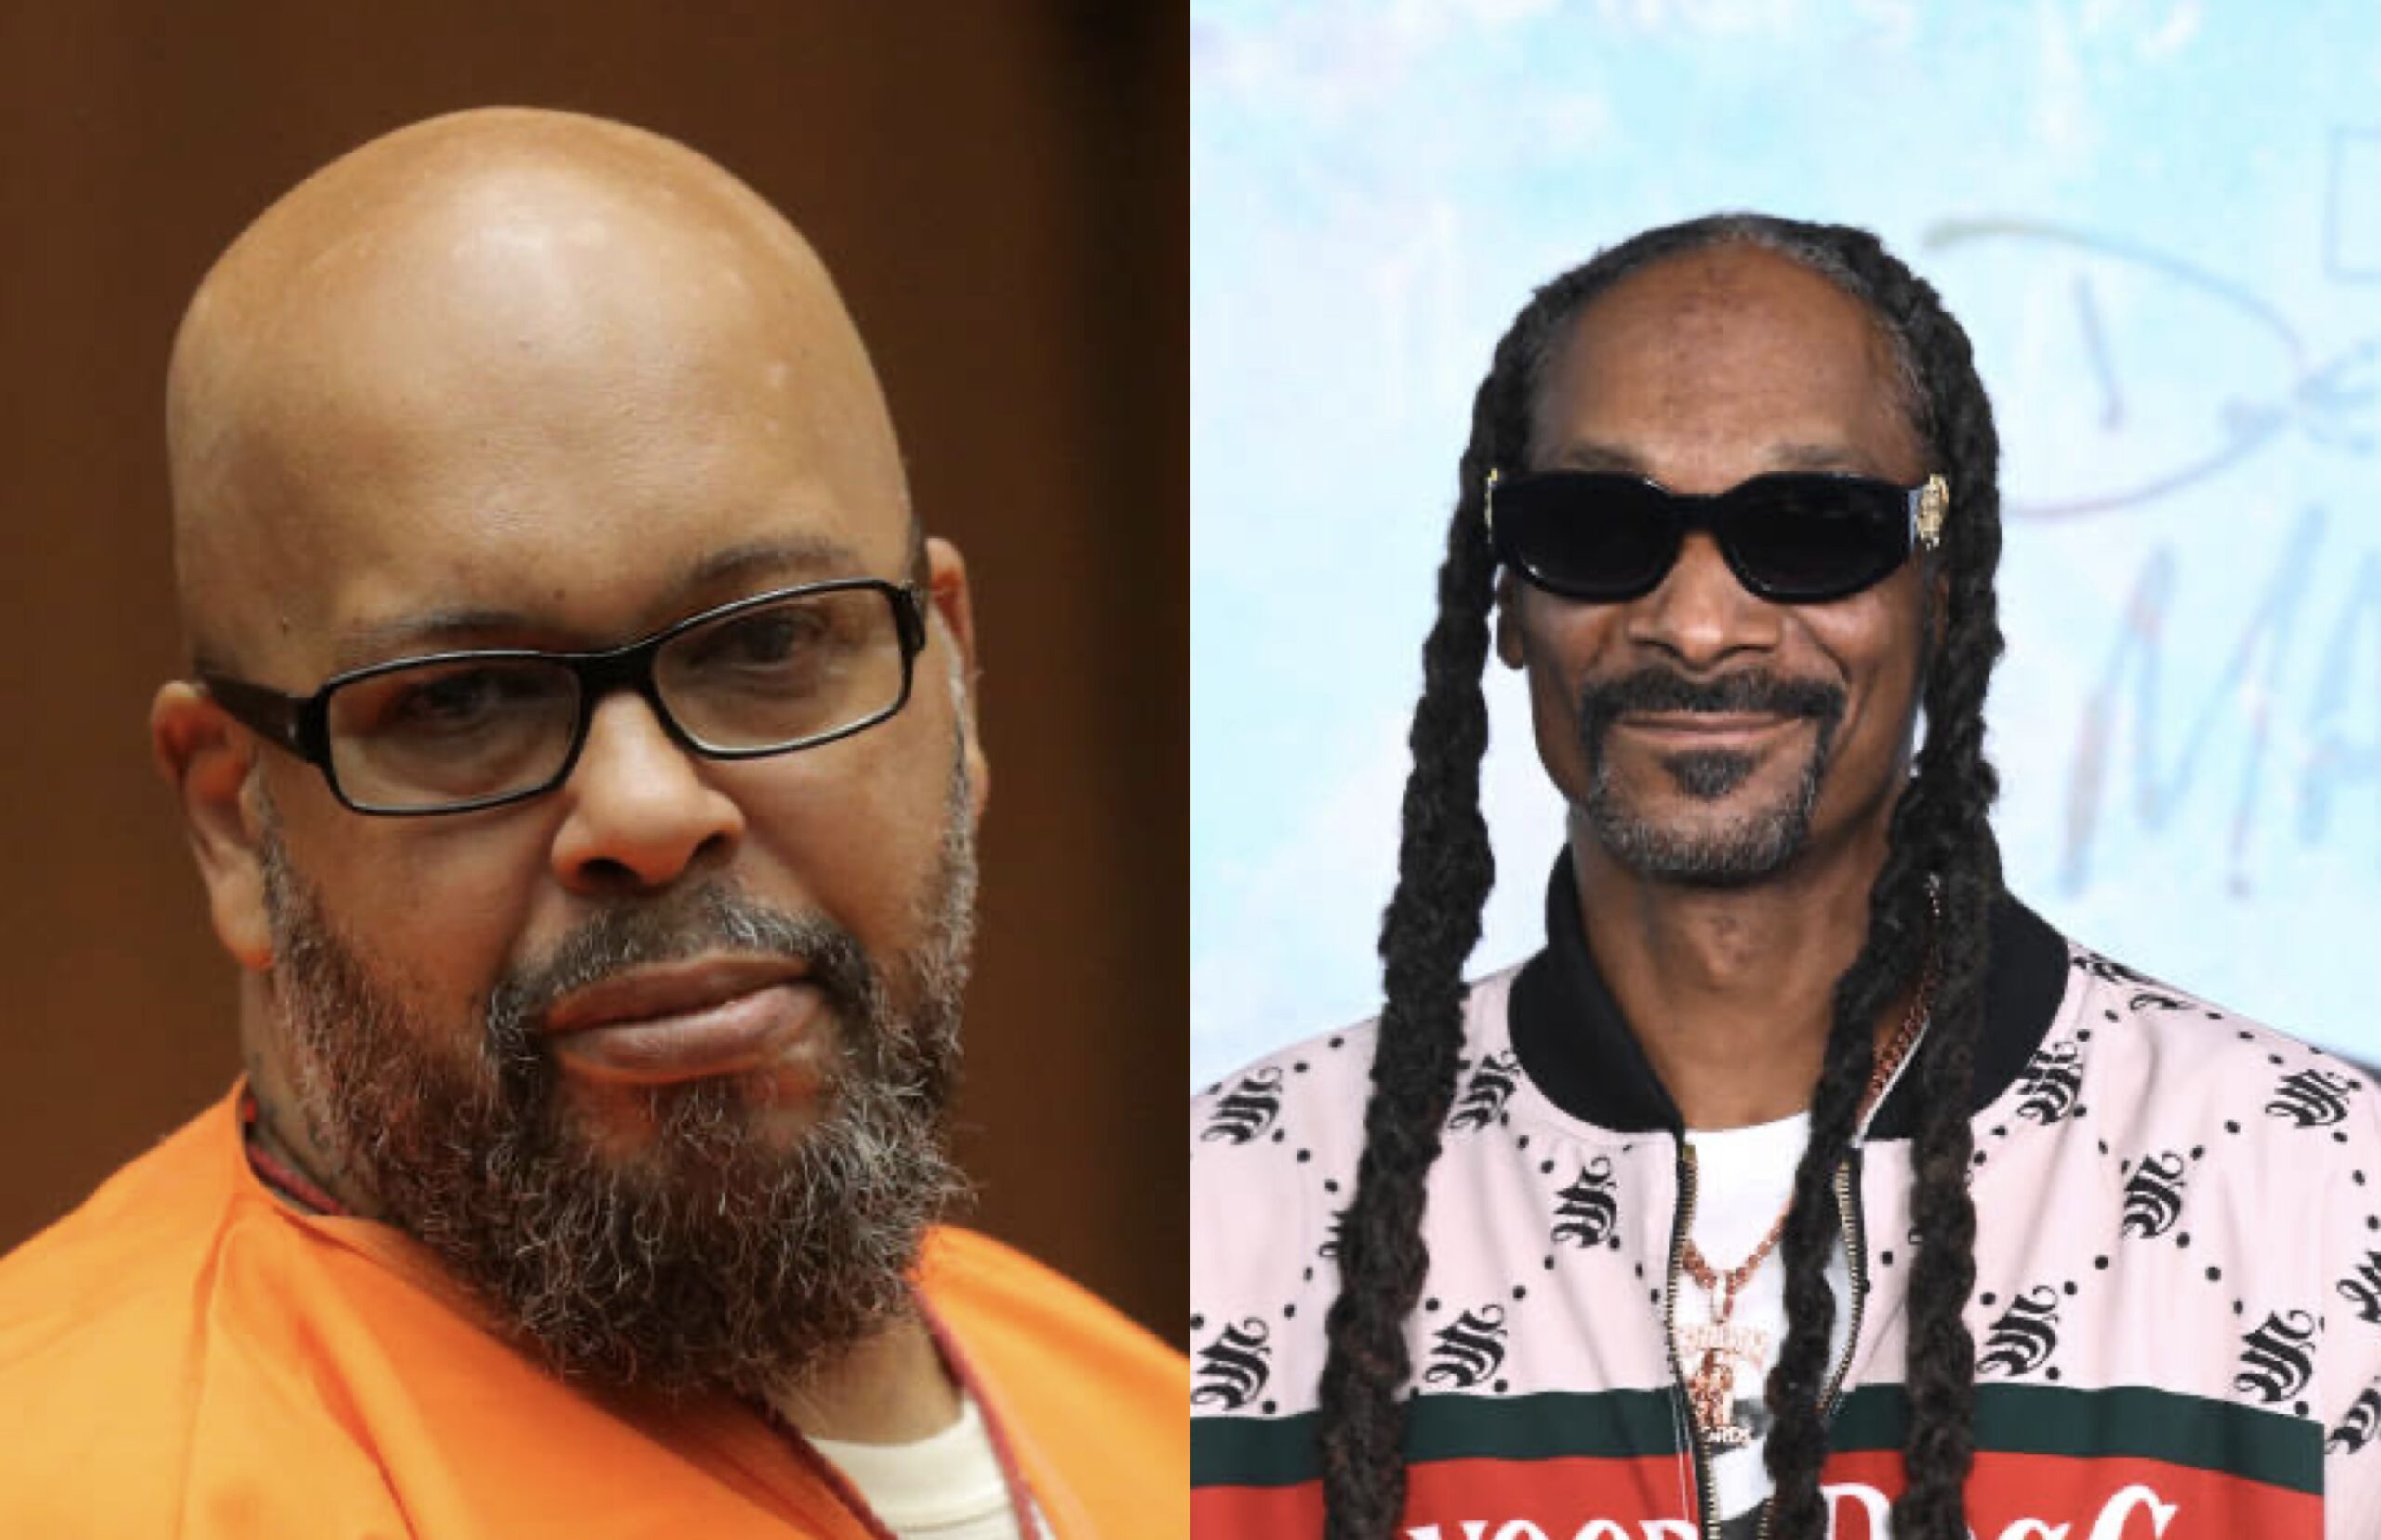 Audio Of Suge Knight Saying Snoop Dogg's Ownership Of Death Row Records Is 'Illegal' Surfaces The Internet